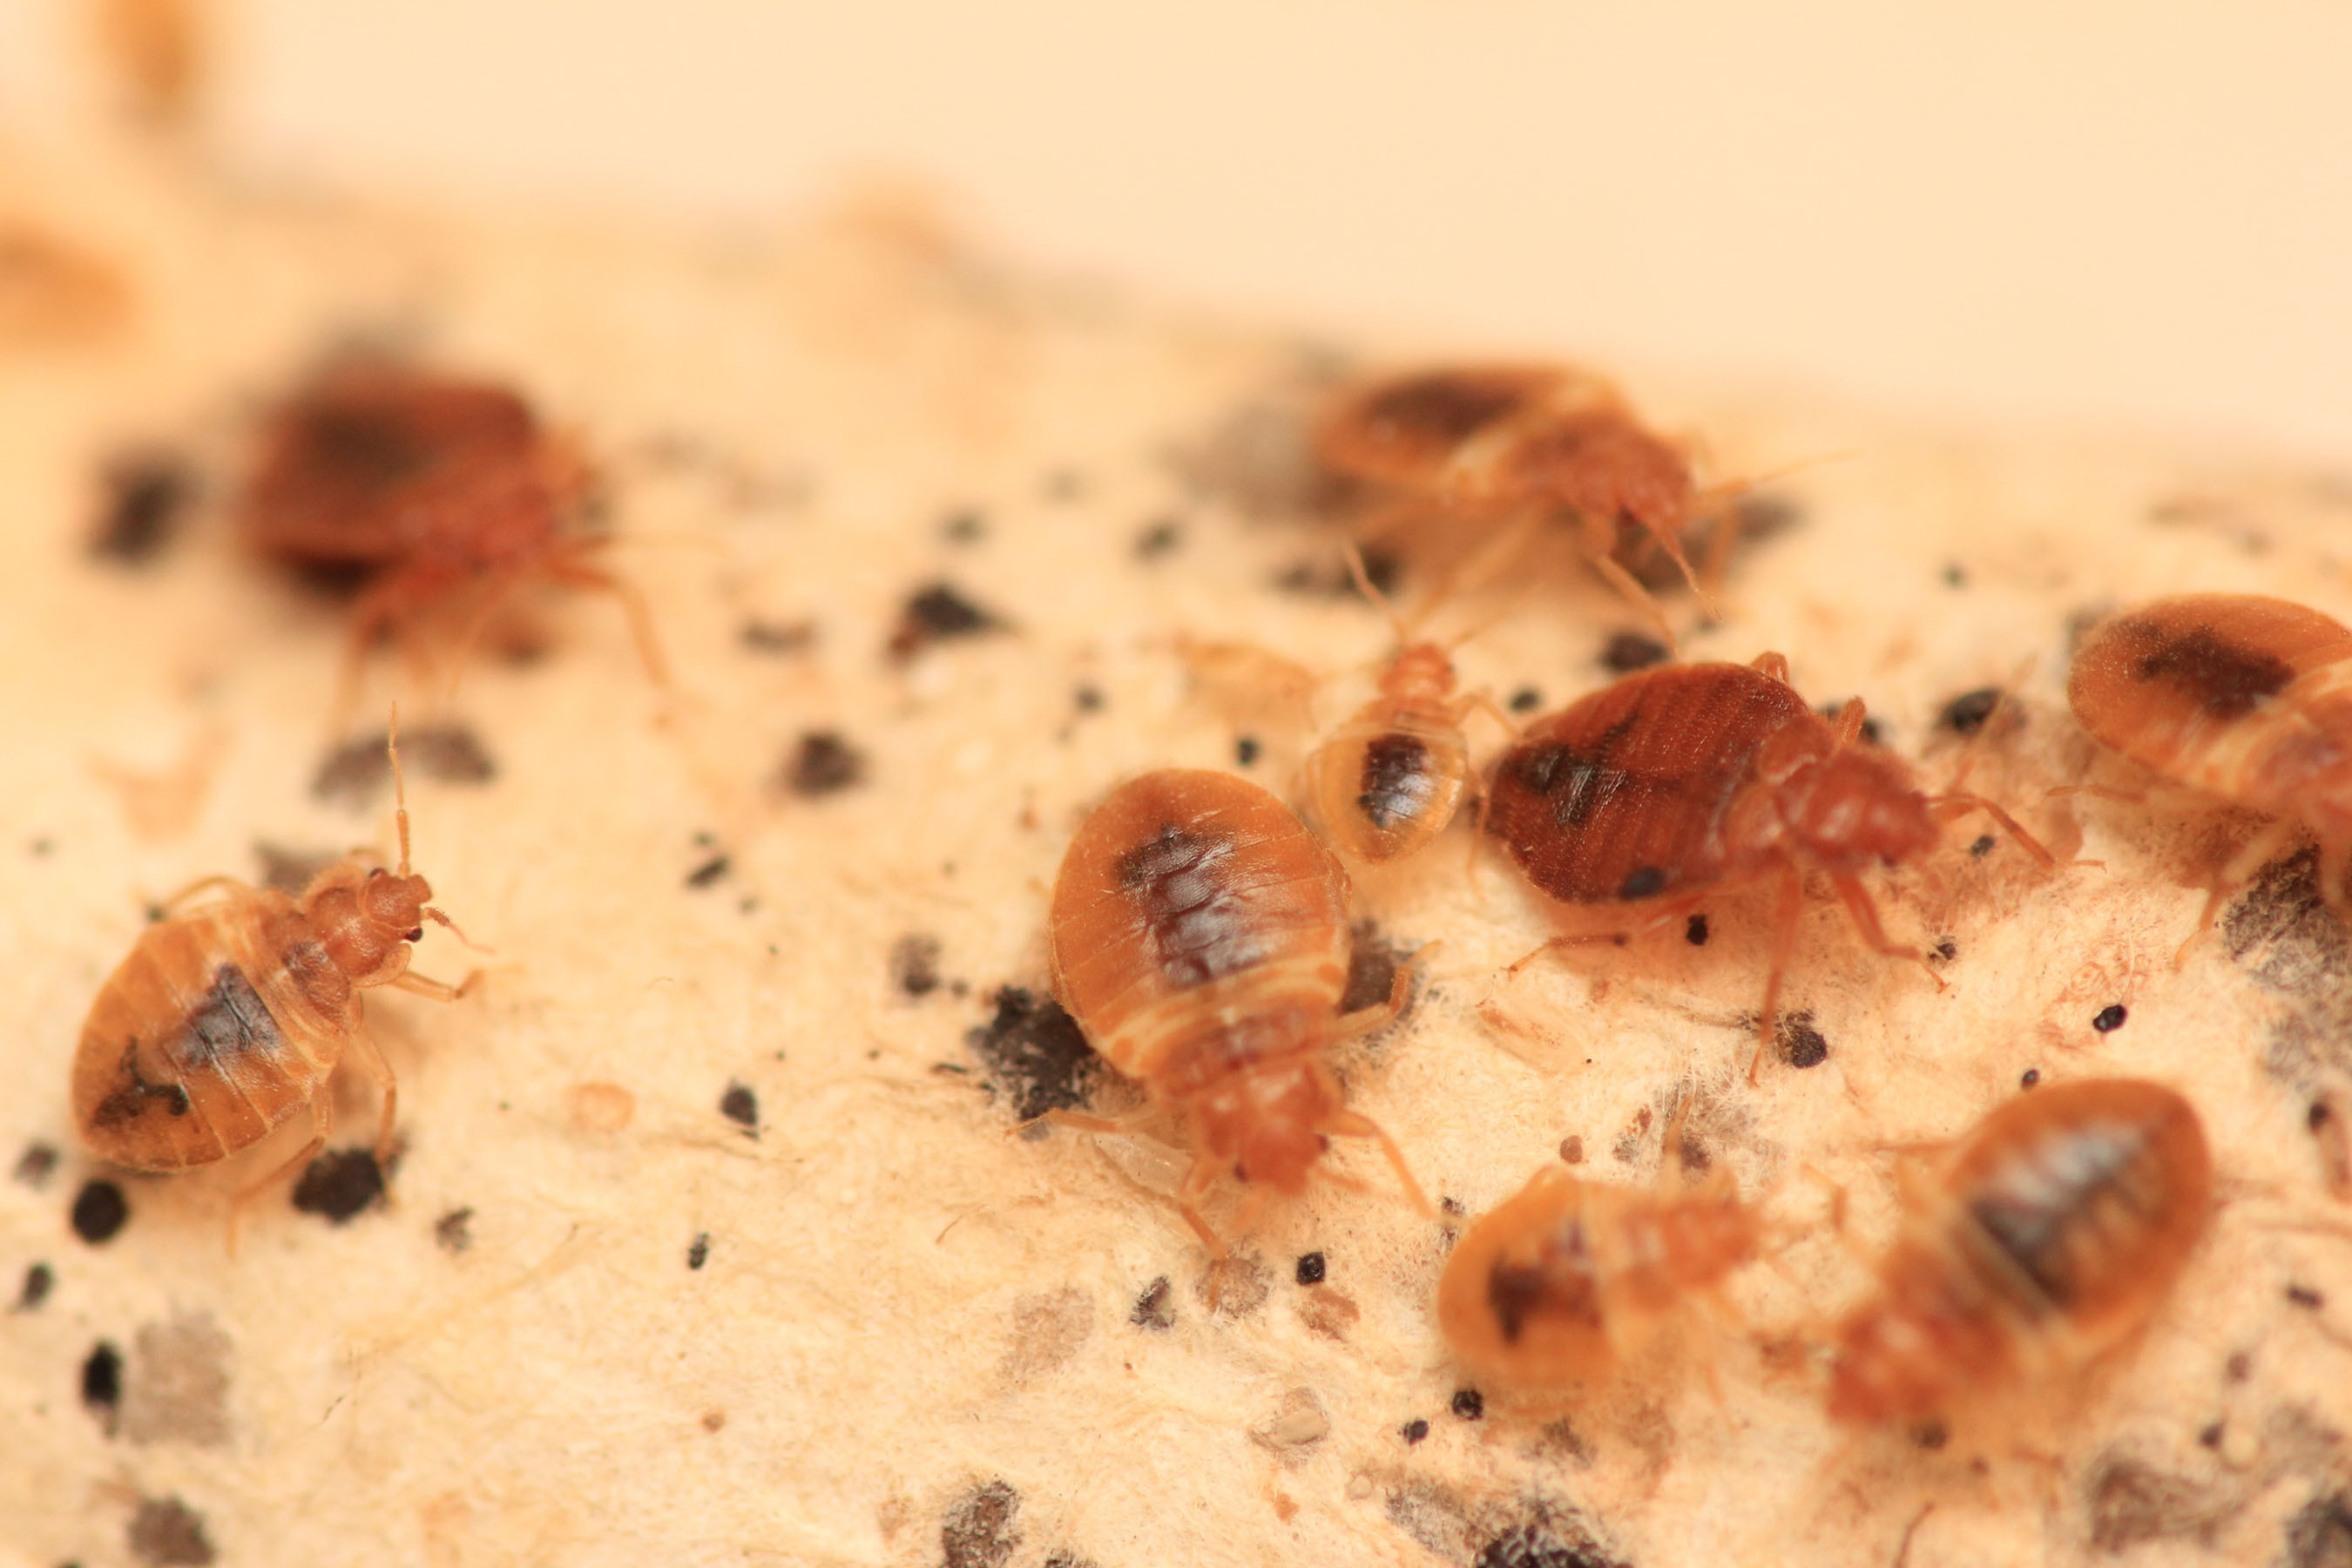 Chicago tops Orkin's 2016 list of bed bug cities for the 4th year in a row. The list ranks cities by the number of bed bug treatments Orkin serviced from January through December 2015 and after an Orkin inspection verified bed bugs were present. The list includes both residential and commercial treatments.  (PRNewsFoto/Orkin, LLC)